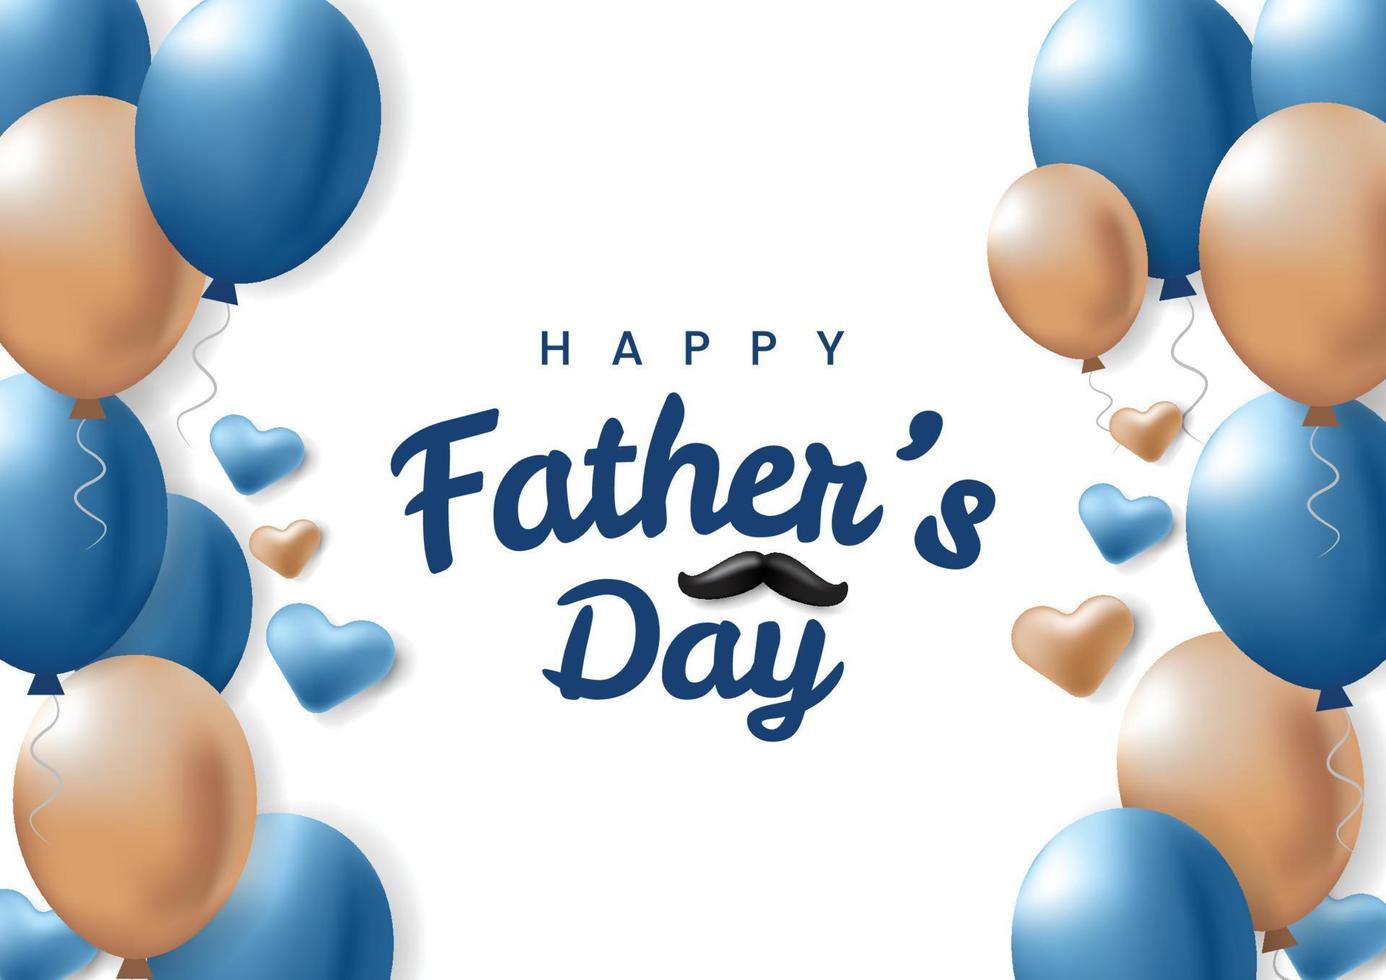 Happy Father's Day greeting card, vector illustration